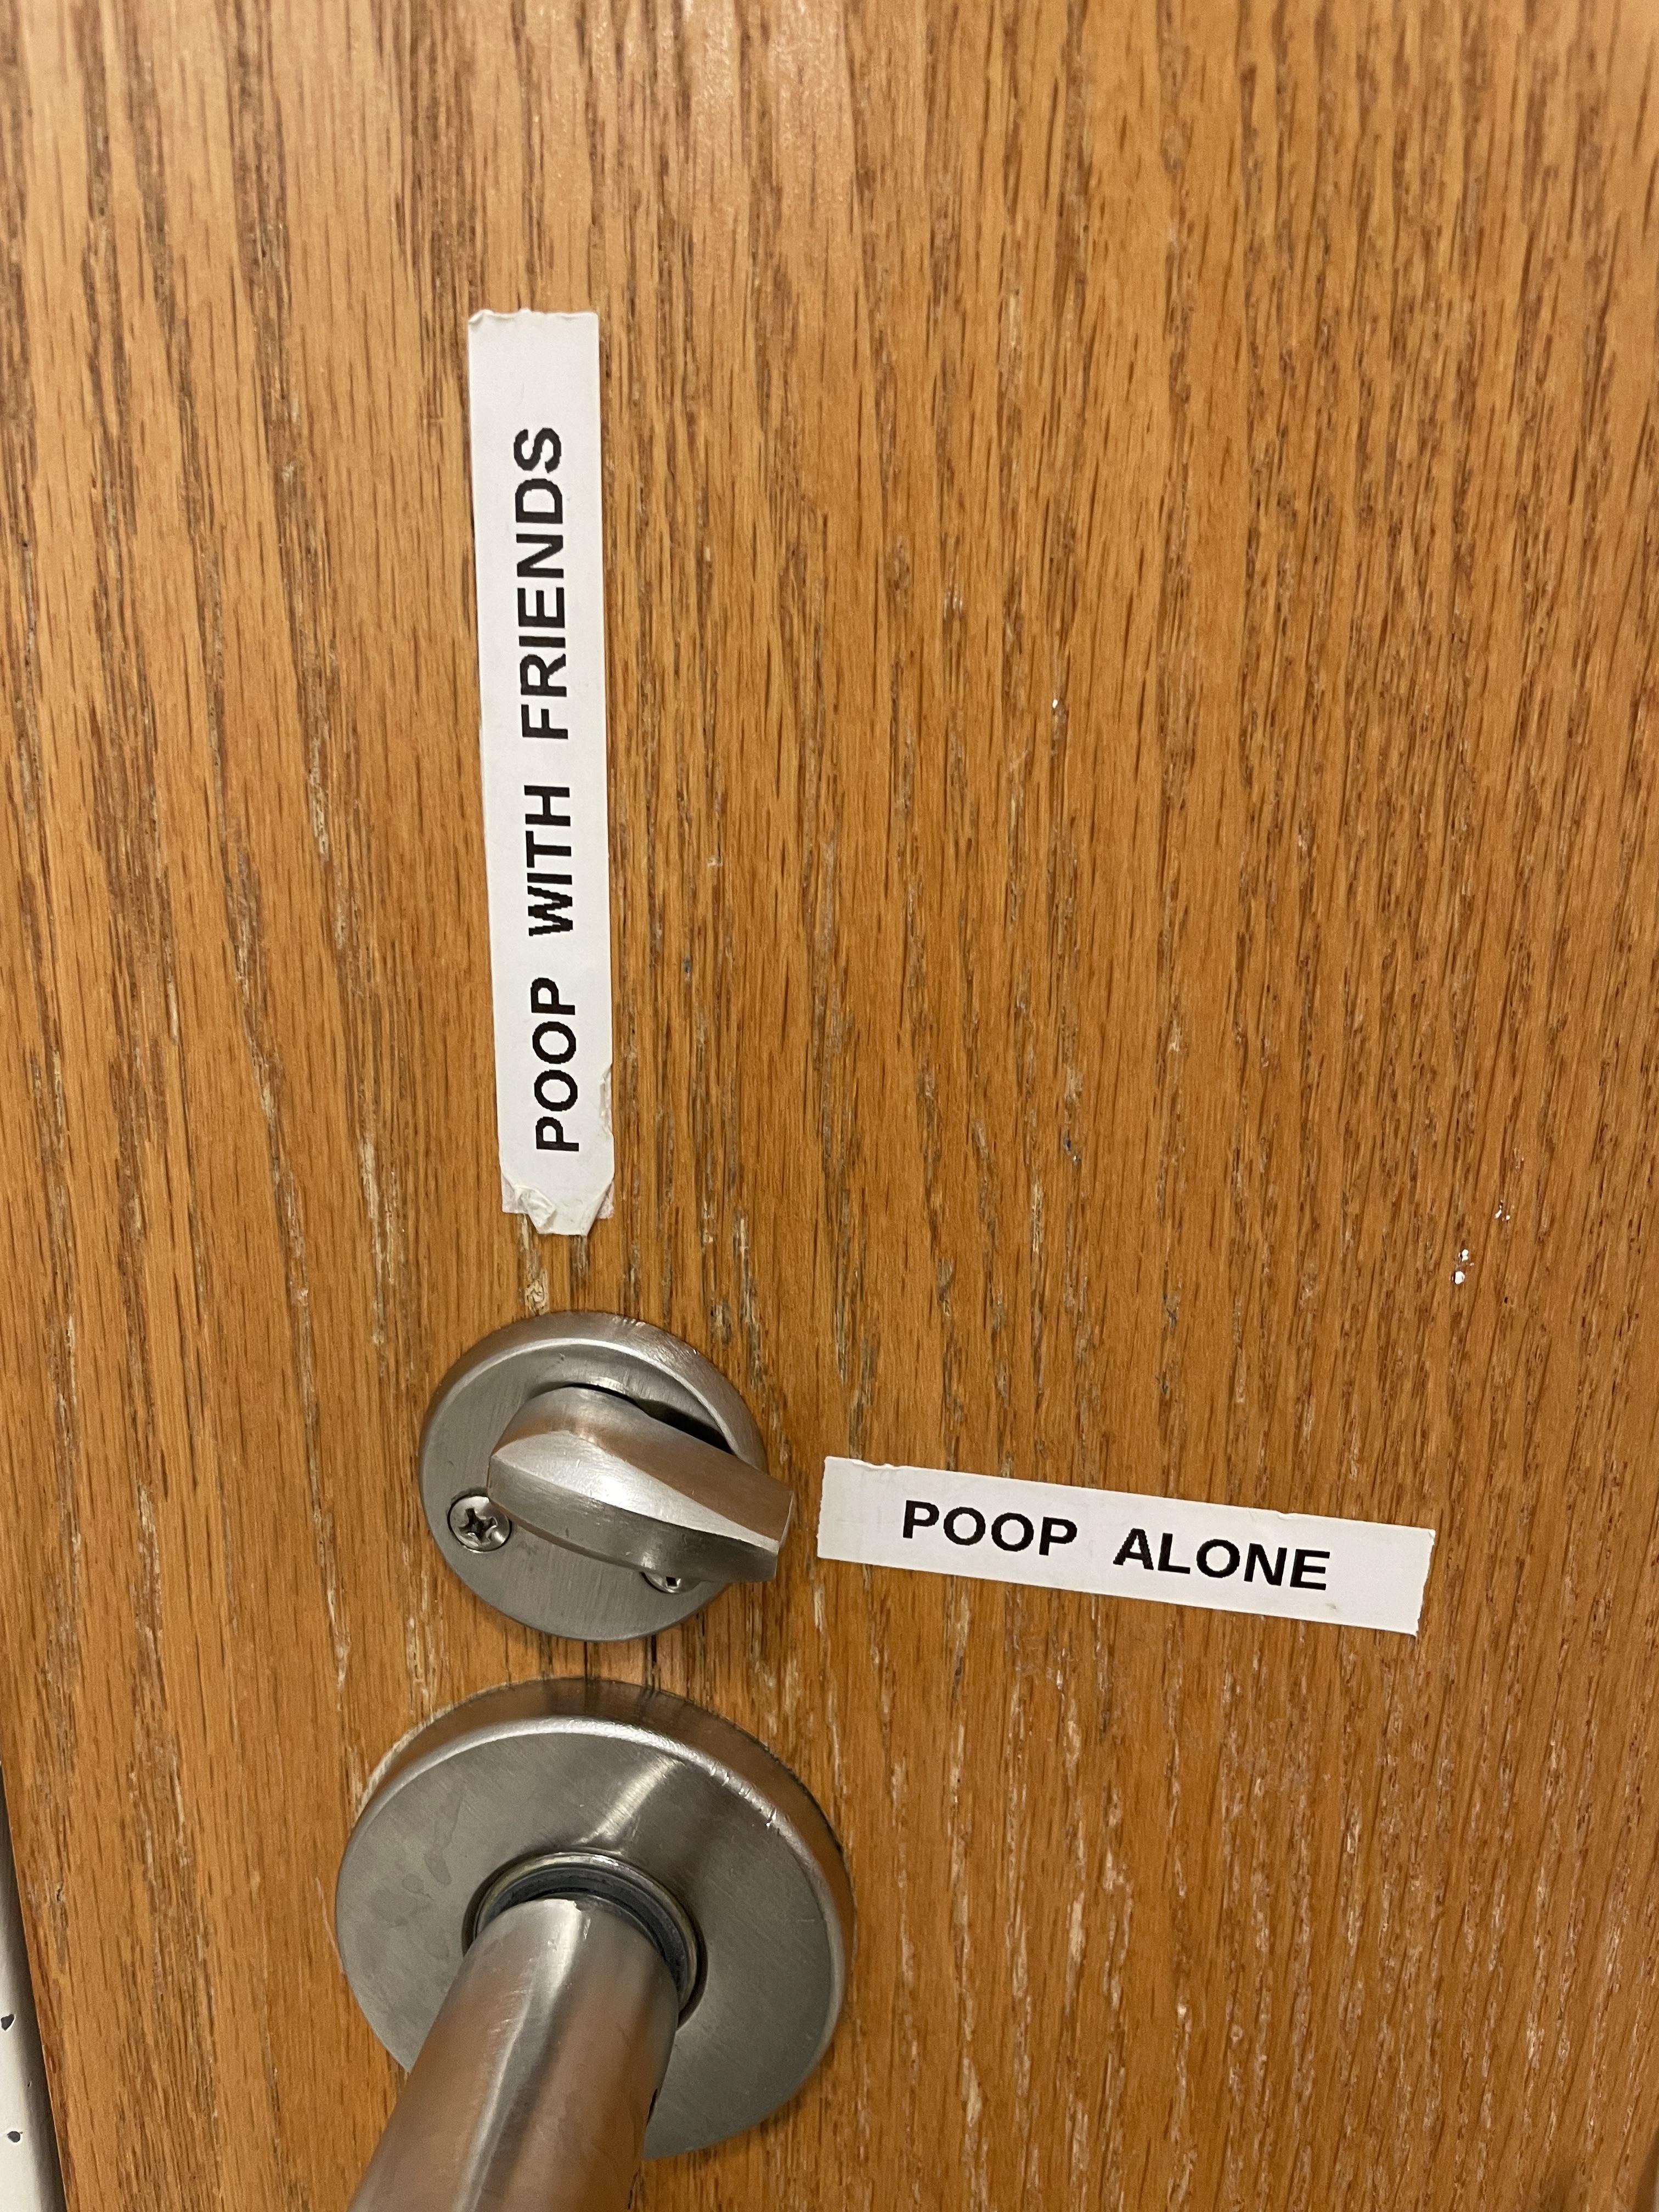 Found in the OR staff bathroom